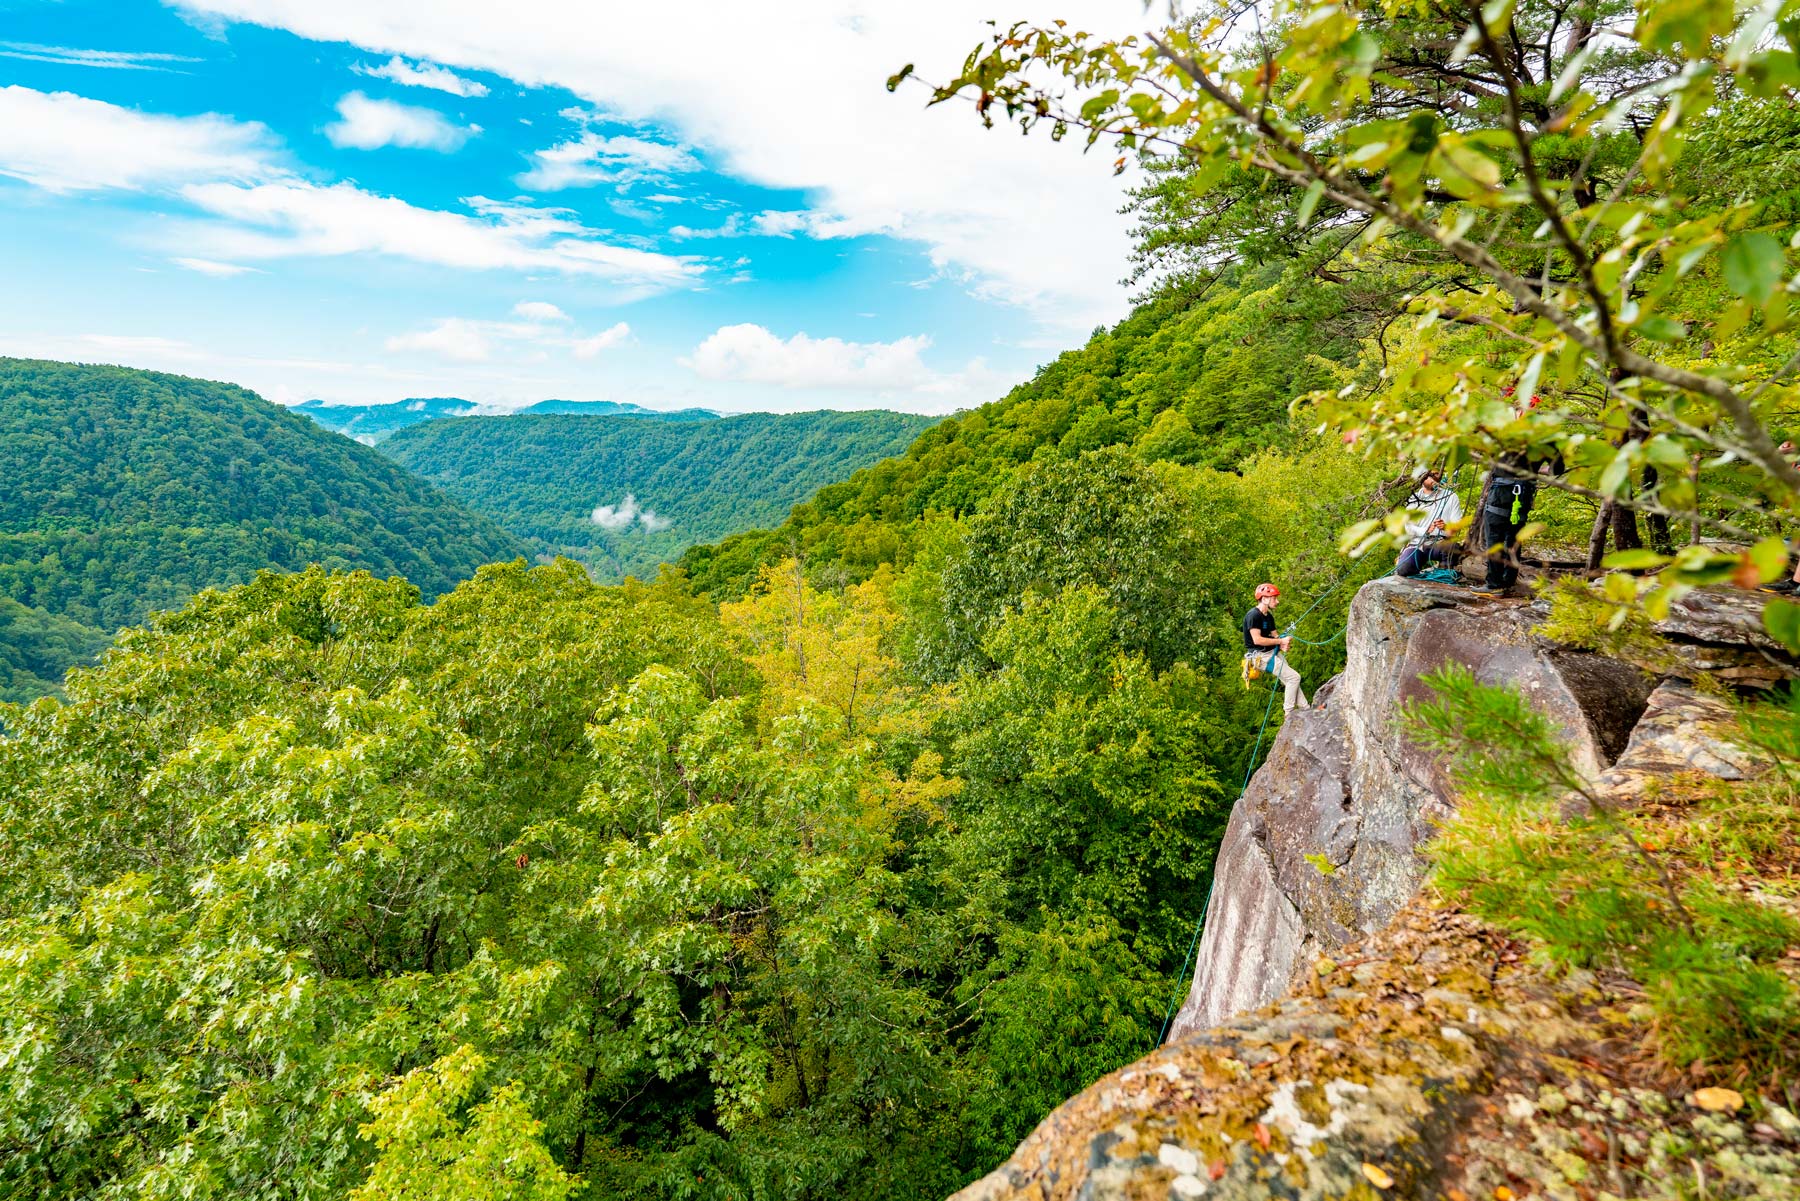 things to do new river gorge national park, new river gorge national park west virginia, rappelling, rock climbing Best National Parks to Visit in September